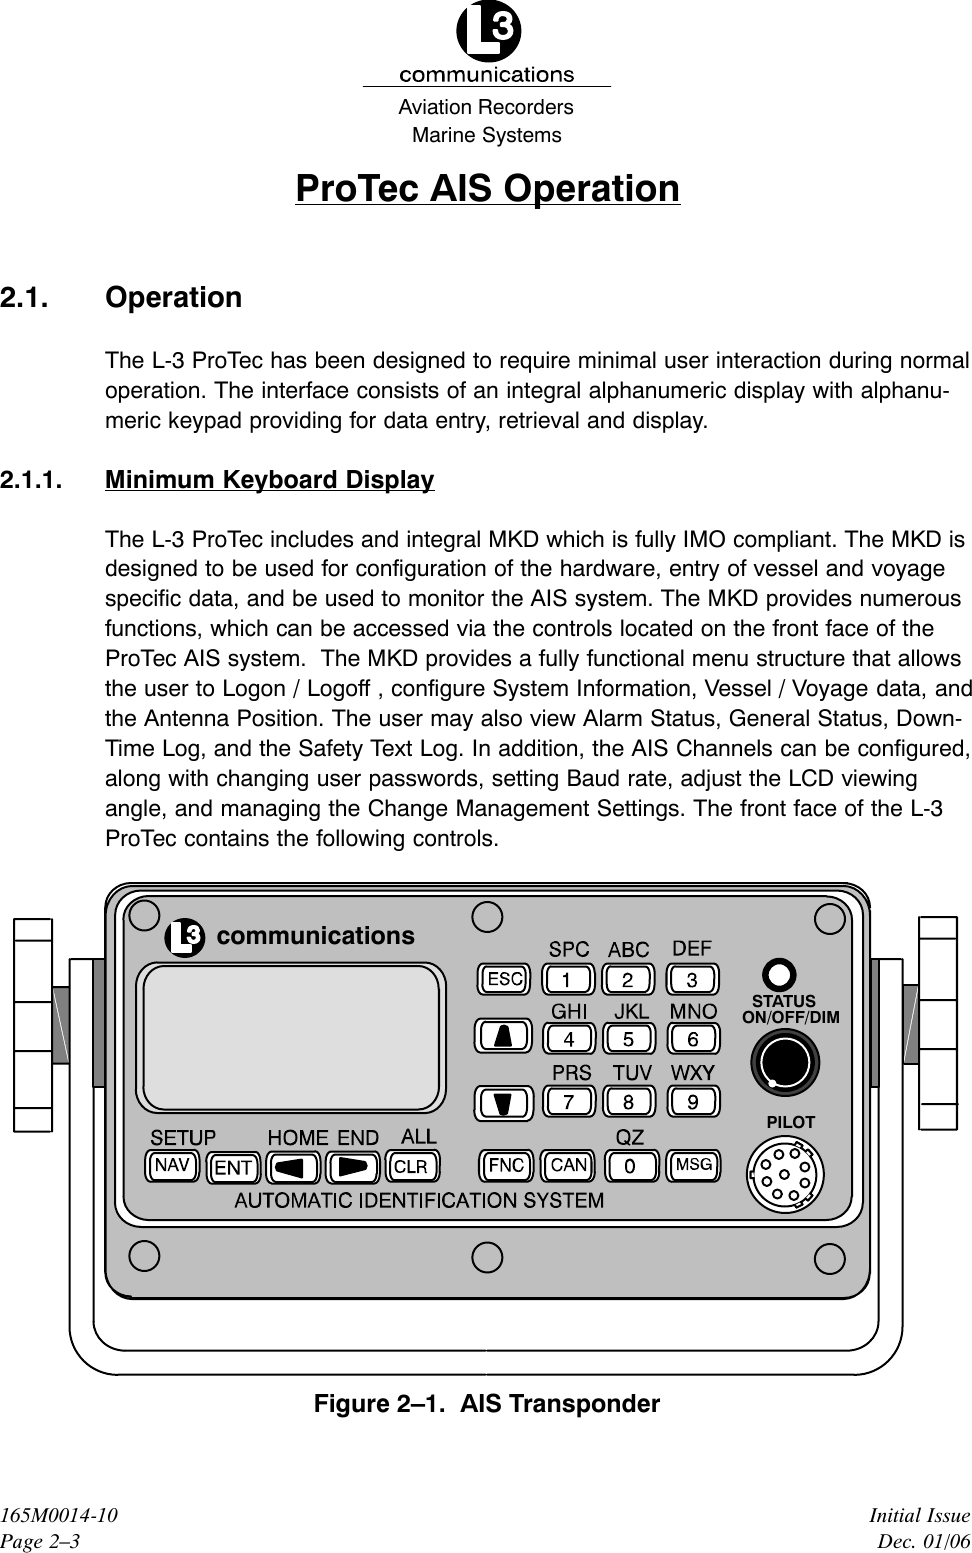 Marine SystemsAviation RecordersInitial IssueDec. 01/06165M0014-10Page 2–3ProTec AIS Operation2.1. OperationThe L-3 ProTec has been designed to require minimal user interaction during normaloperation. The interface consists of an integral alphanumeric display with alphanu-meric keypad providing for data entry, retrieval and display.2.1.1. Minimum Keyboard DisplayThe L-3 ProTec includes and integral MKD which is fully IMO compliant. The MKD isdesigned to be used for configuration of the hardware, entry of vessel and voyagespecific data, and be used to monitor the AIS system. The MKD provides numerousfunctions, which can be accessed via the controls located on the front face of the ProTec AIS system.  The MKD provides a fully functional menu structure that allowsthe user to Logon / Logoff , configure System Information, Vessel / Voyage data, andthe Antenna Position. The user may also view Alarm Status, General Status, Down-Time Log, and the Safety Text Log. In addition, the AIS Channels can be configured,along with changing user passwords, setting Baud rate, adjust the LCD viewingangle, and managing the Change Management Settings. The front face of the L-3ProTec contains the following controls.communicationsSTATUSON/OFF/DIMPILOTFigure 2–1.  AIS Transponder